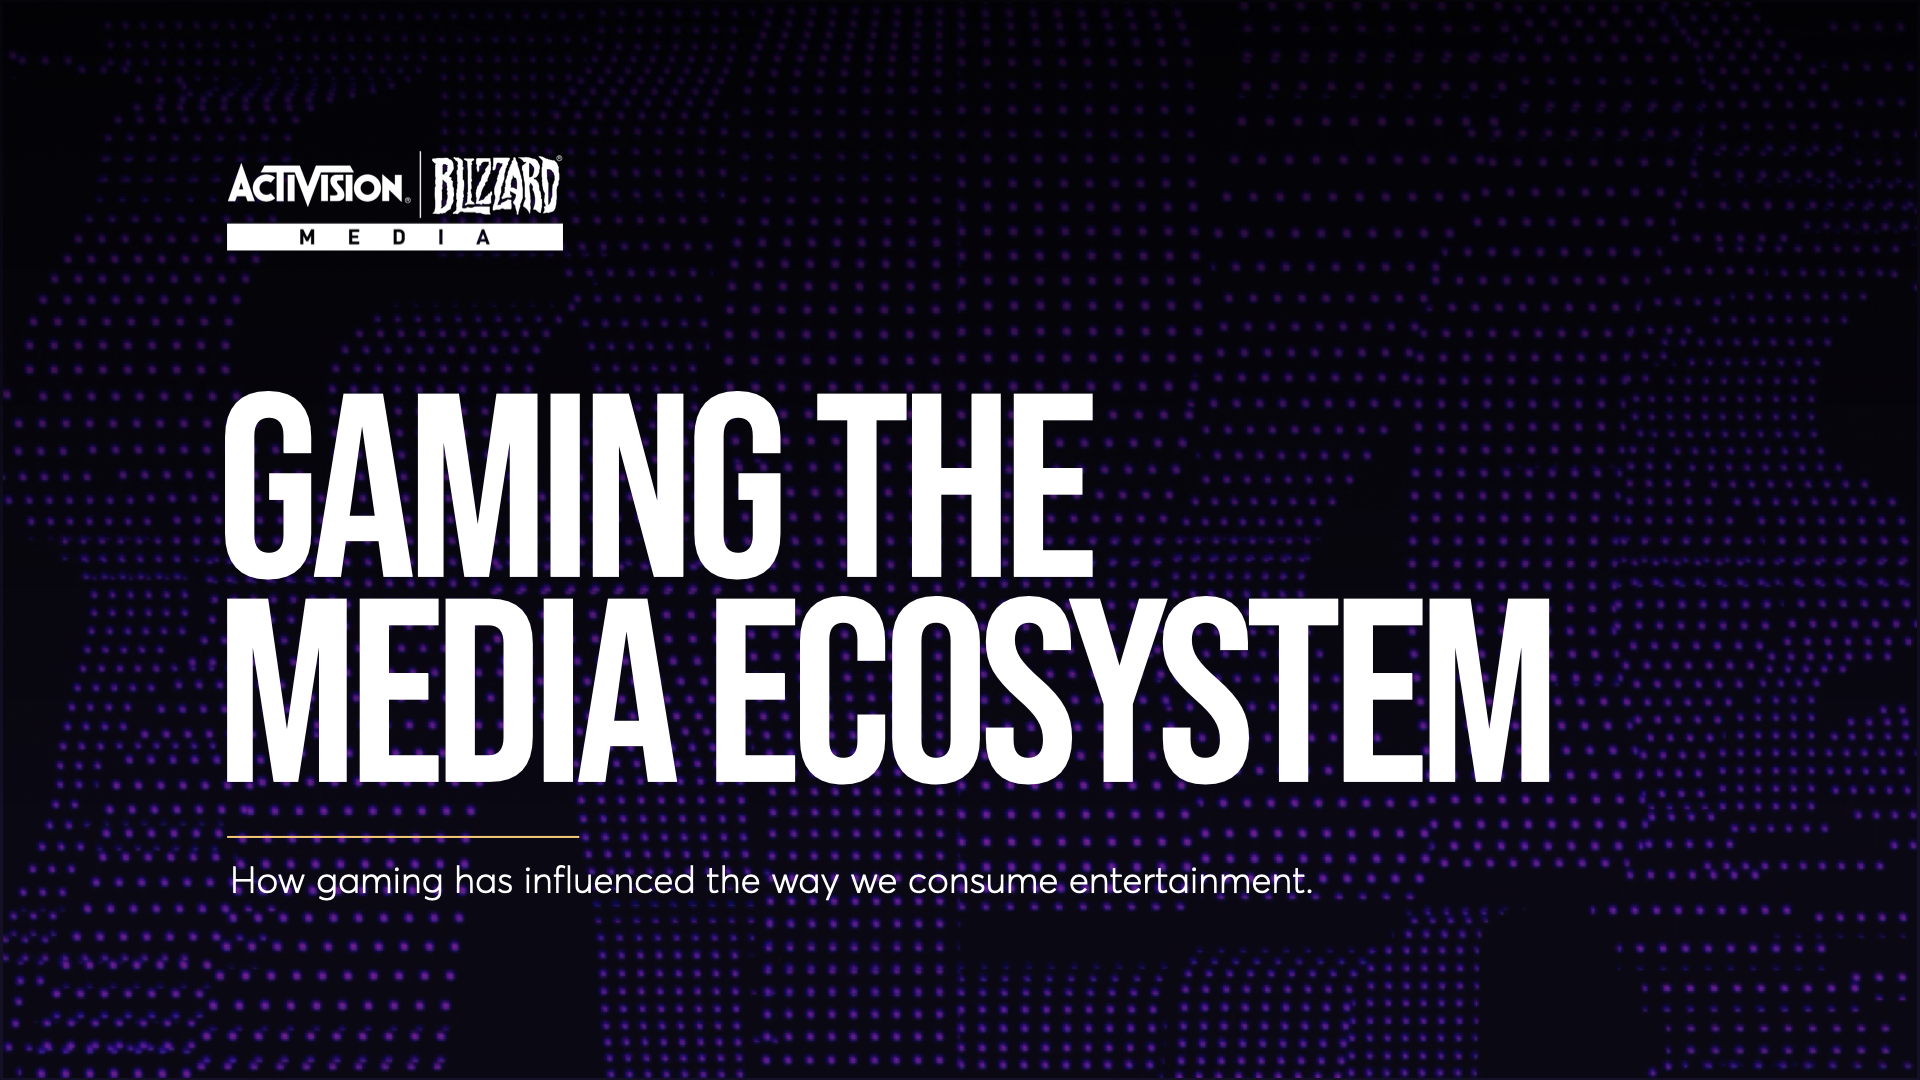 Watch video: "Gaming The Media Ecosystem"